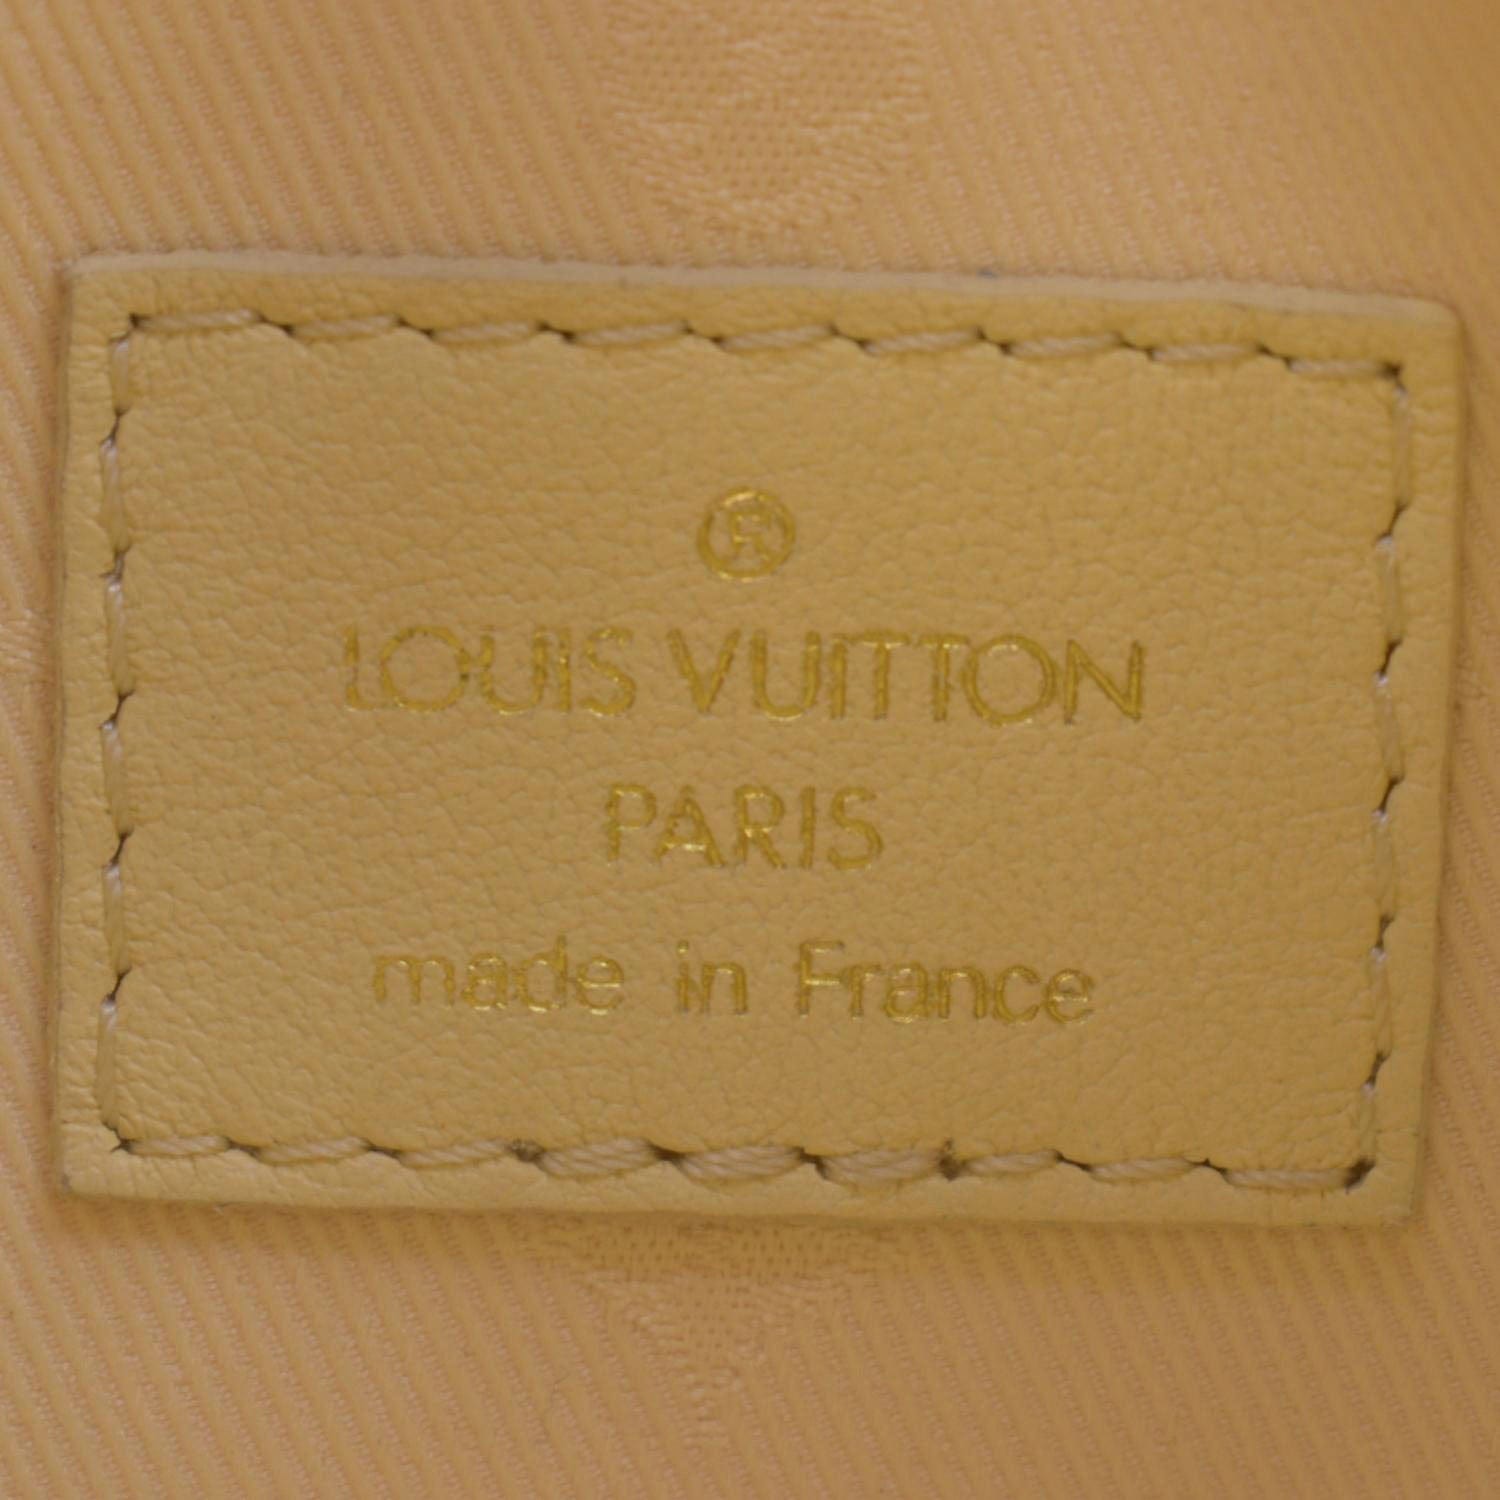 NEW SS22 BAGS IN! LOUIS VUITTON BUBBLEGRAM STYLE AND OVER THE MOON! WHAT DO  WE THINK? 